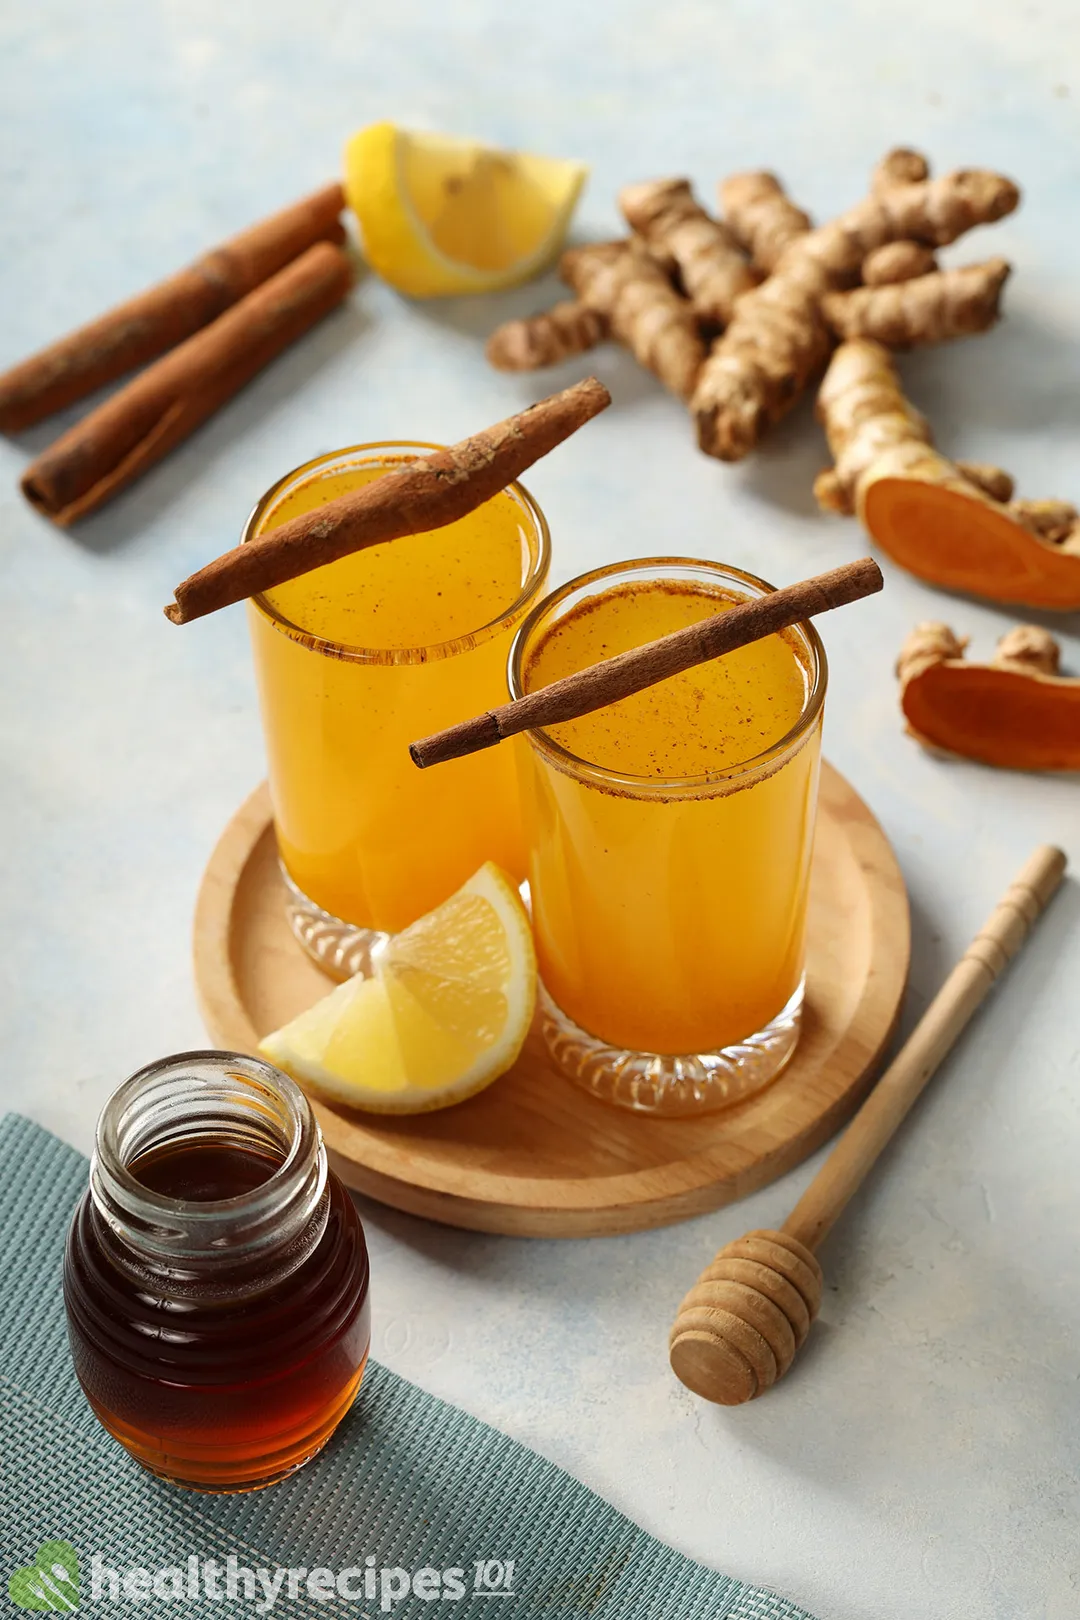 two glasses of yellow liquid next to a honey jar on a table